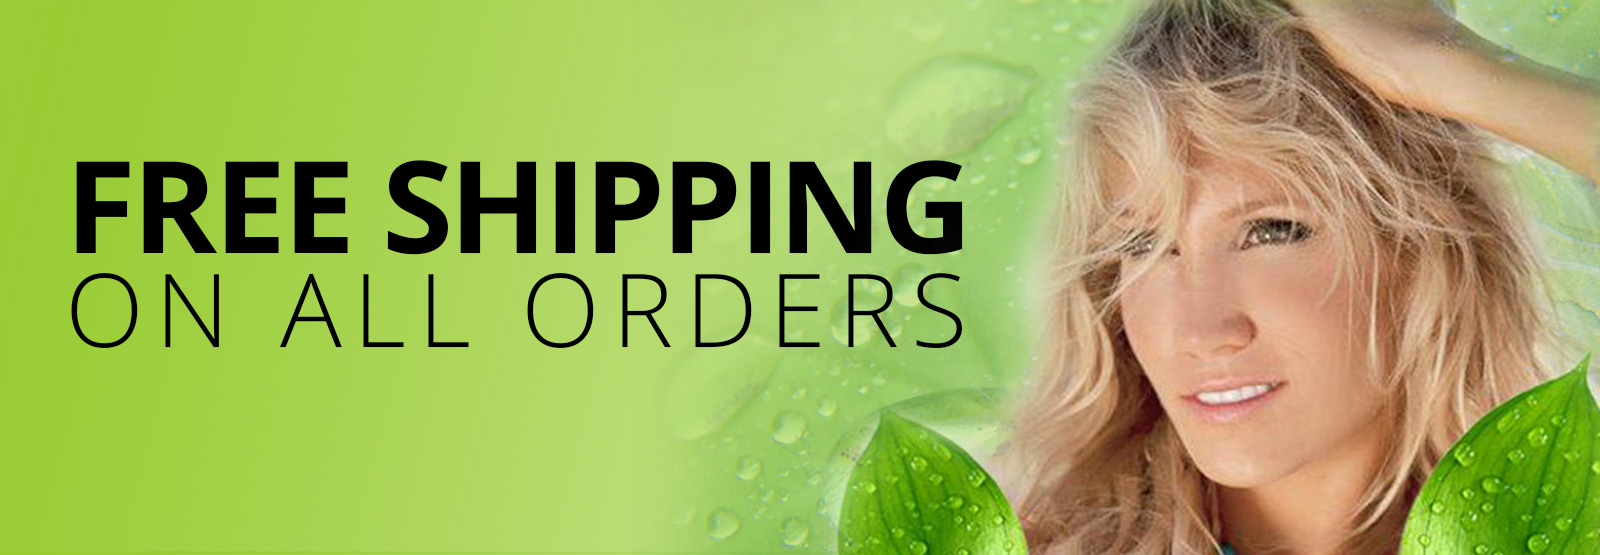 FREE SHIPPING ON ALL ORDERS